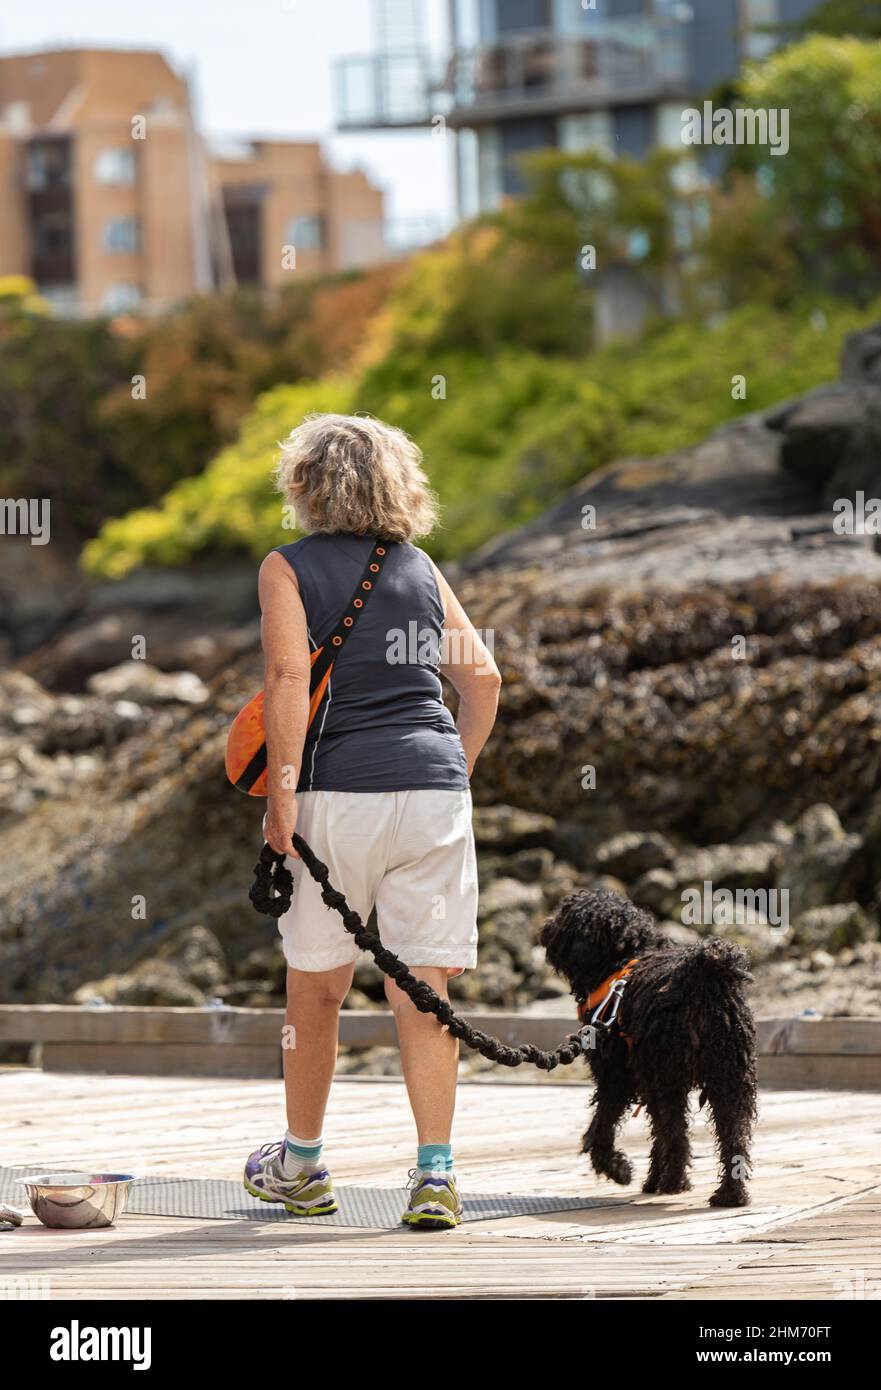 Senior woman walking her little dog on a city Park street. Elderly lady outside with her dog. Street view, travel photo, selective focus Stock Photo